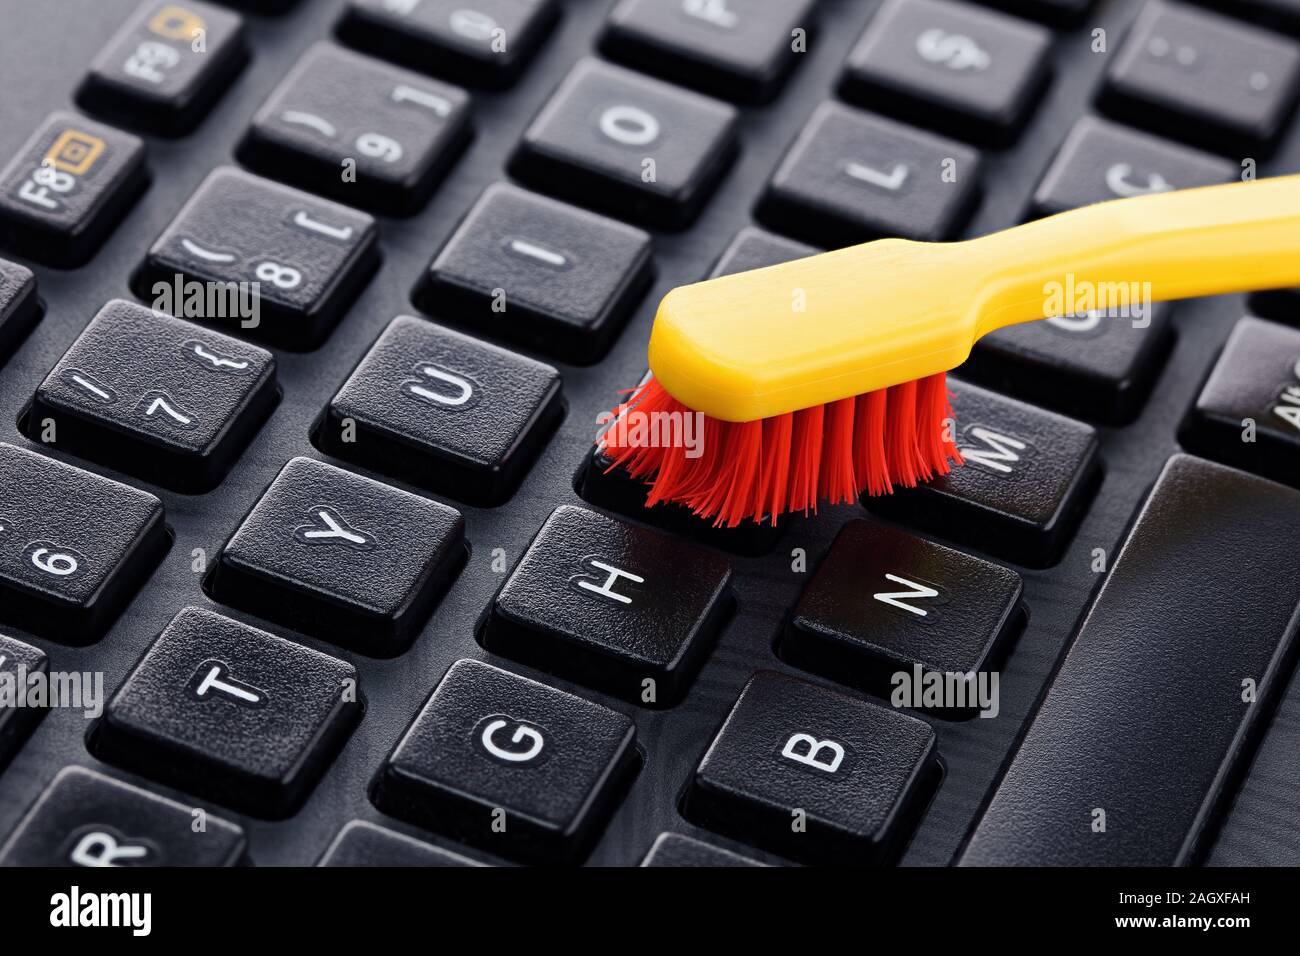 Keyboard cleaning with a toothbrush. Dust and germ free keyboard Stock Photo